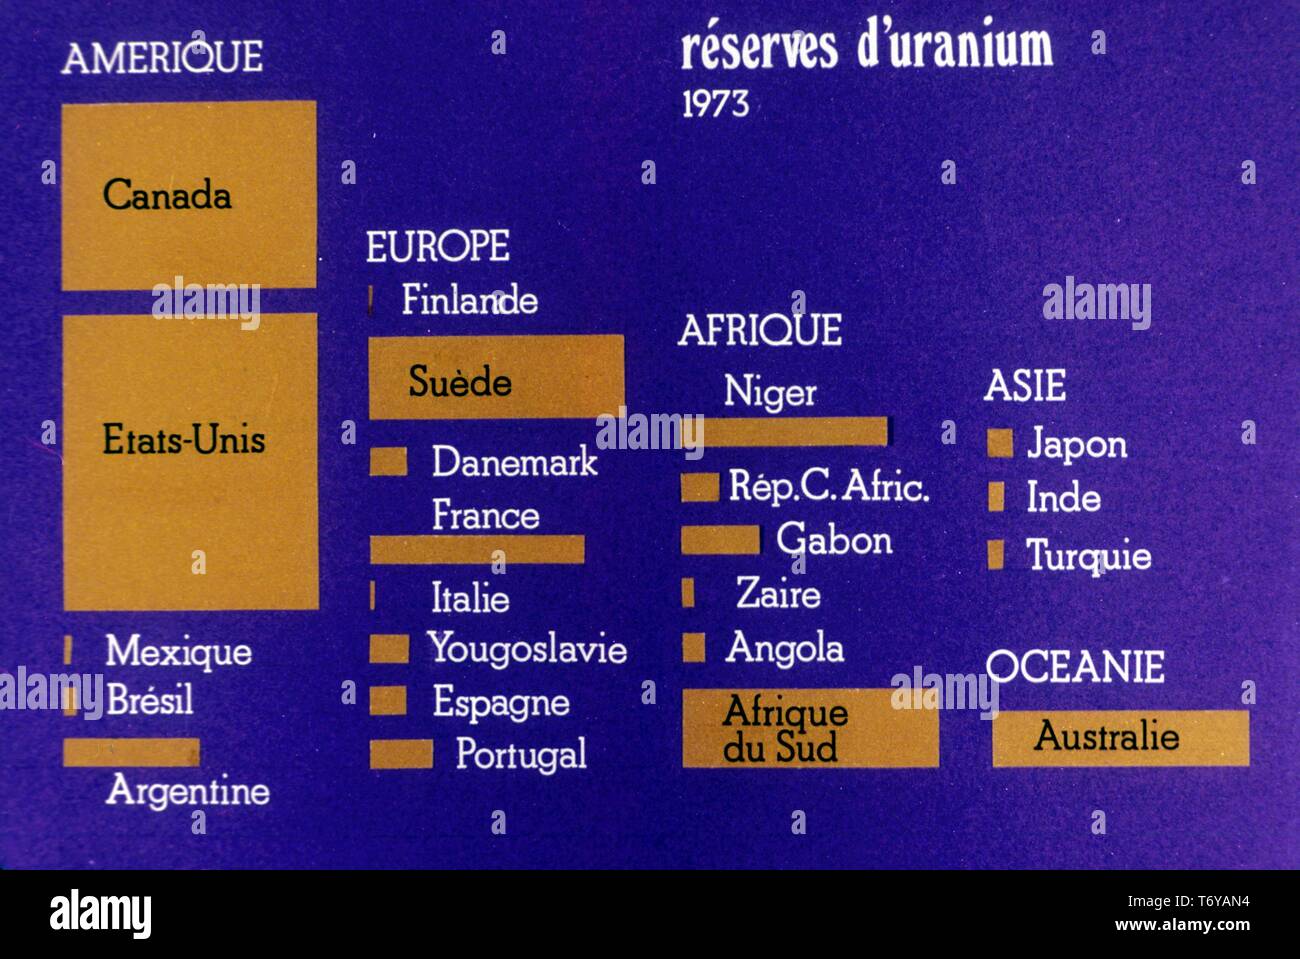 Chart, labeled in French, graphically depicting international uranium reserves by country, 1973. Image courtesy US Department of Energy. () Stock Photo